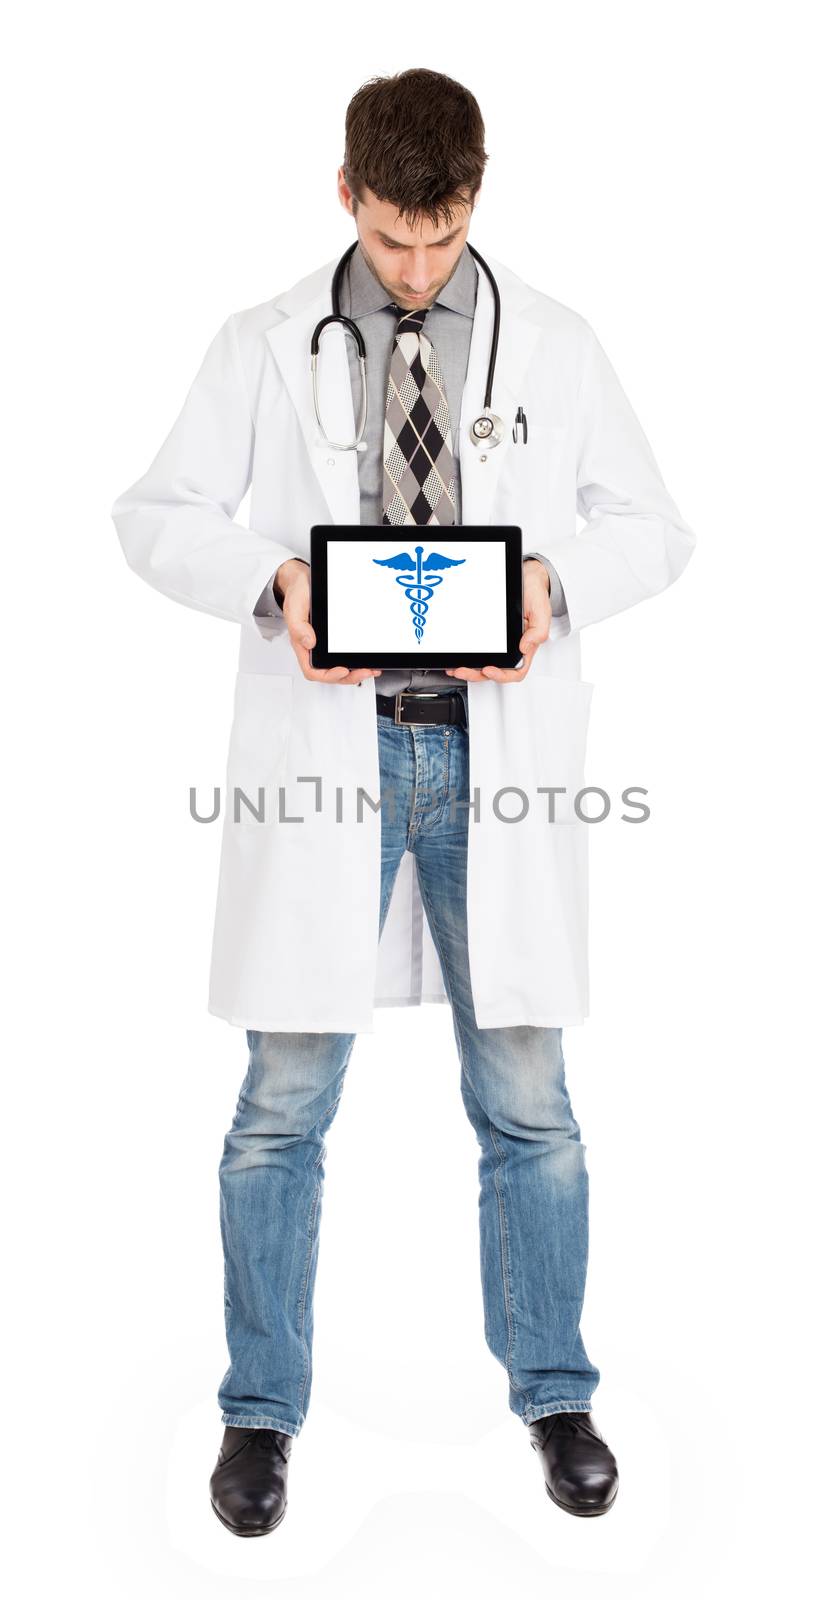 Doctor holding tablet - Caduceus symbol by michaklootwijk